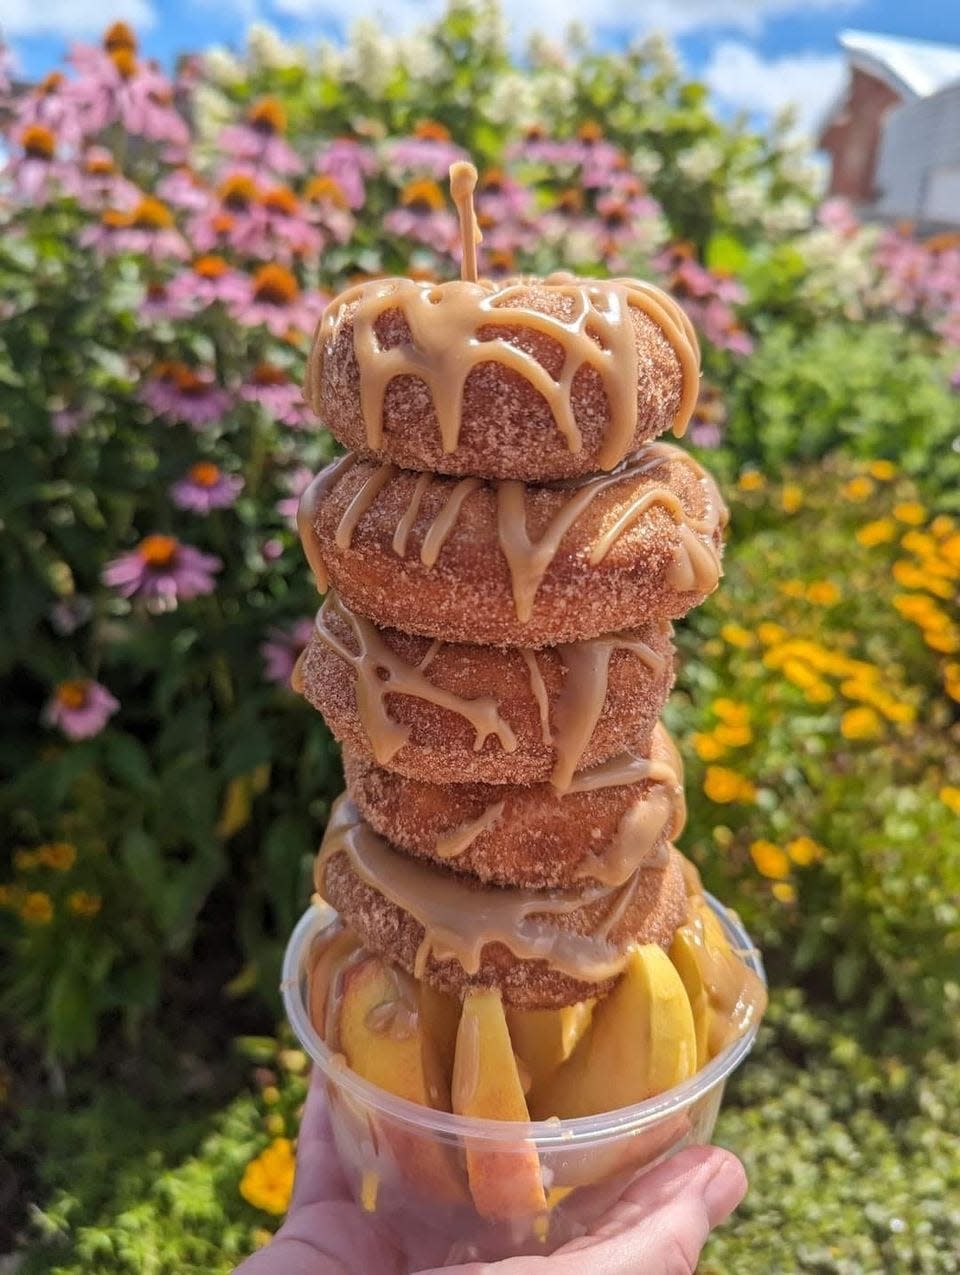 Apple cider doughnuts rest on an apple base in Center Grove Orchard's doughnut tower. Center Grove Orchard is located in Cambridge.